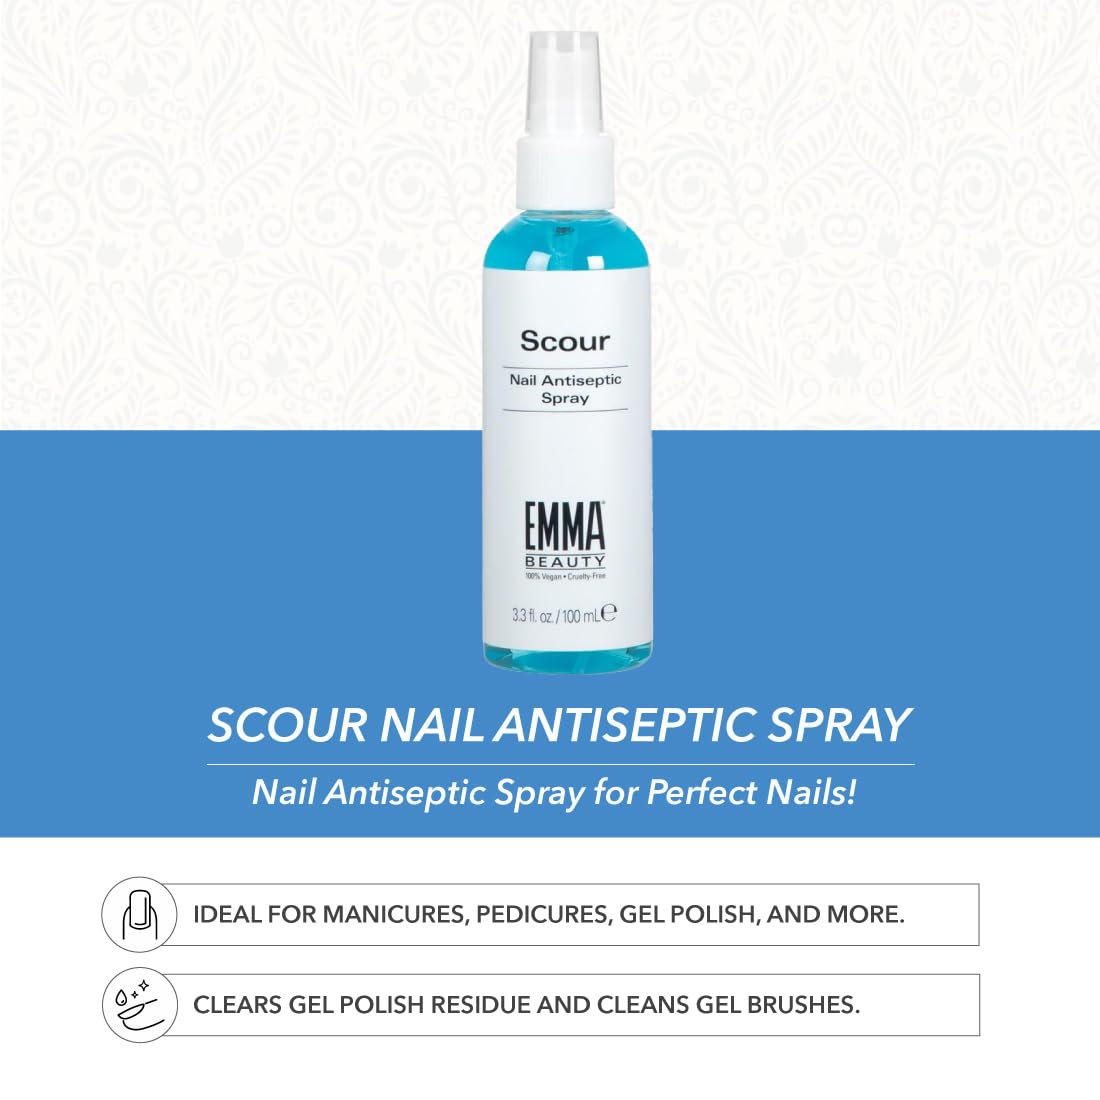 EMMA Beauty Scour Nail Antiseptic Spray, Nail Surface Cleanser and Cleaning Solution, 12+ Free Formula, 100% Vegan & Cruelty-Free, 3.3 oz.